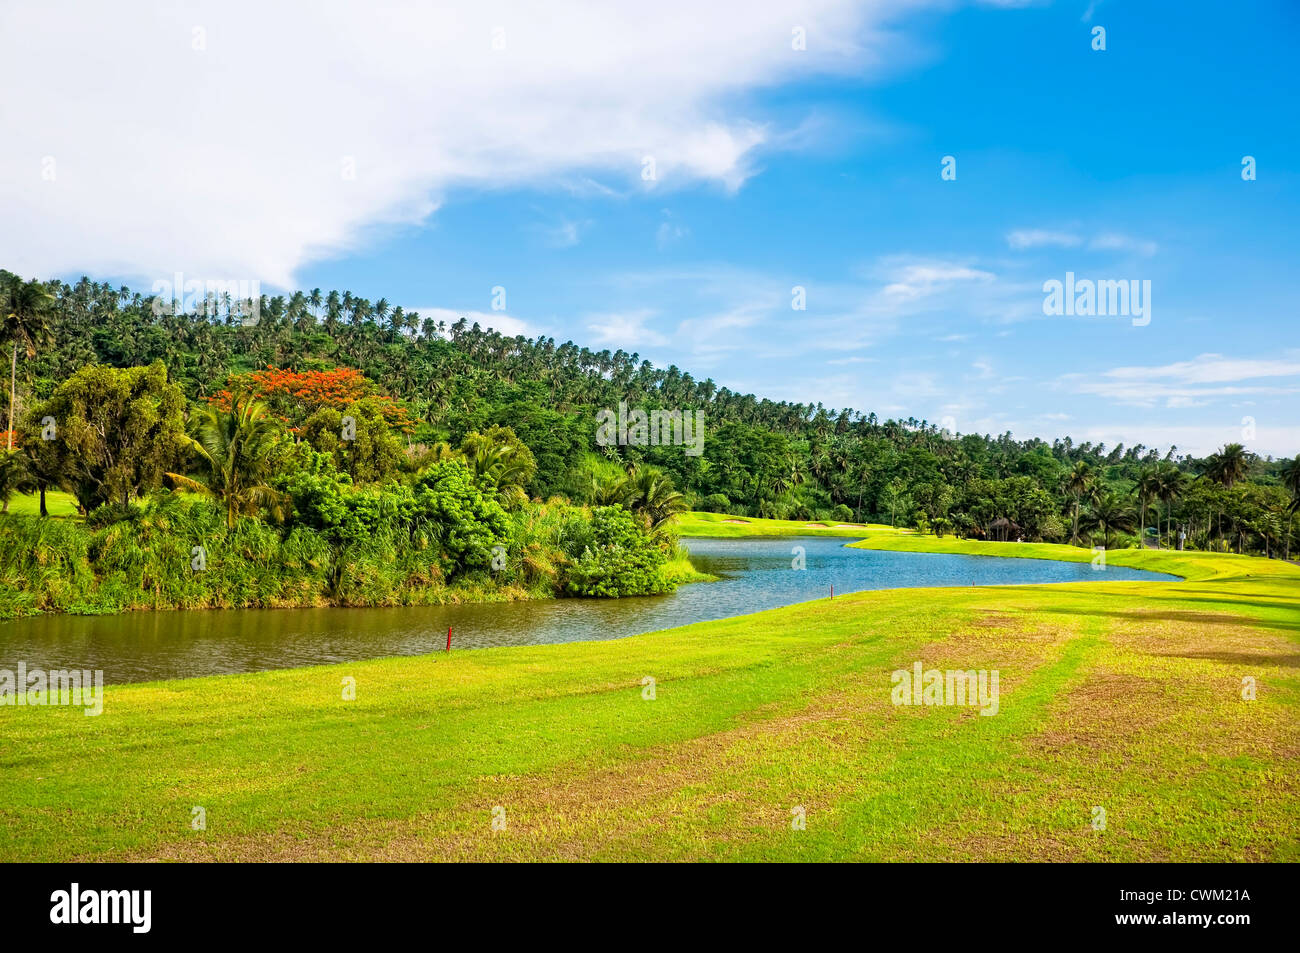 A beautiful golf course in the Philippines Stock Photo